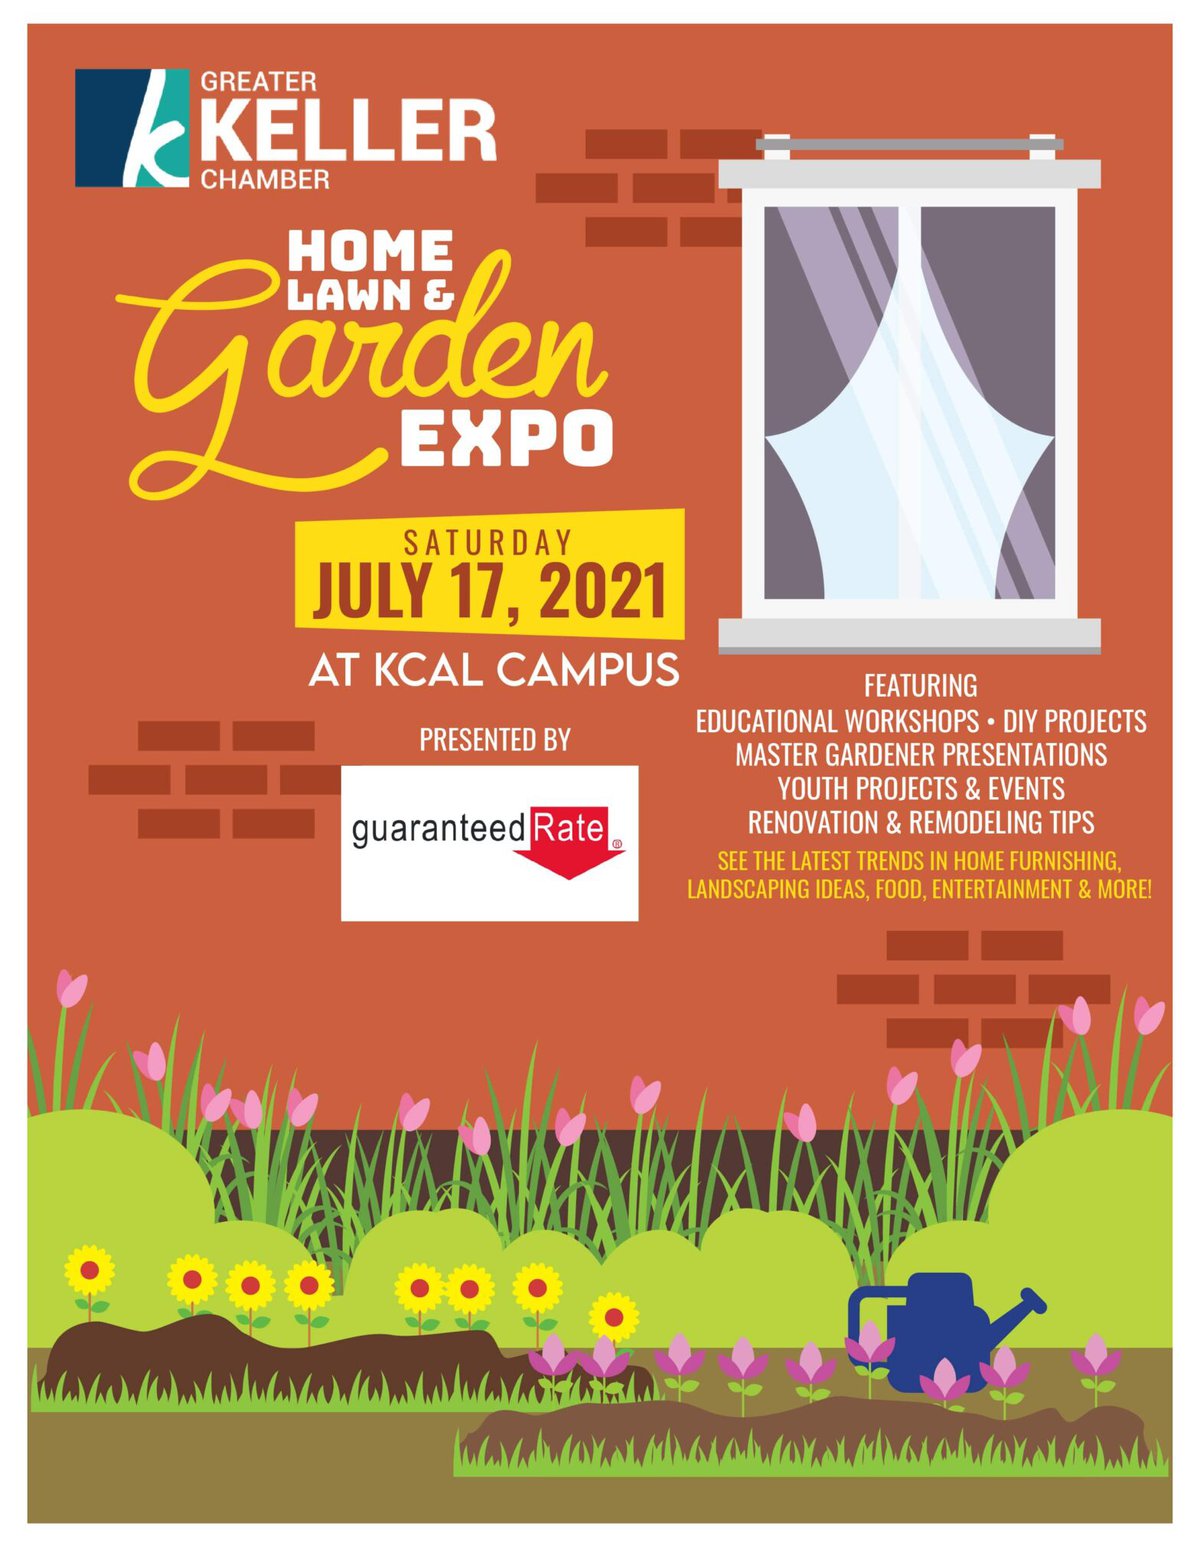 The Greater Keller Chamber of Commerce Home, Lawn & Garden Expo